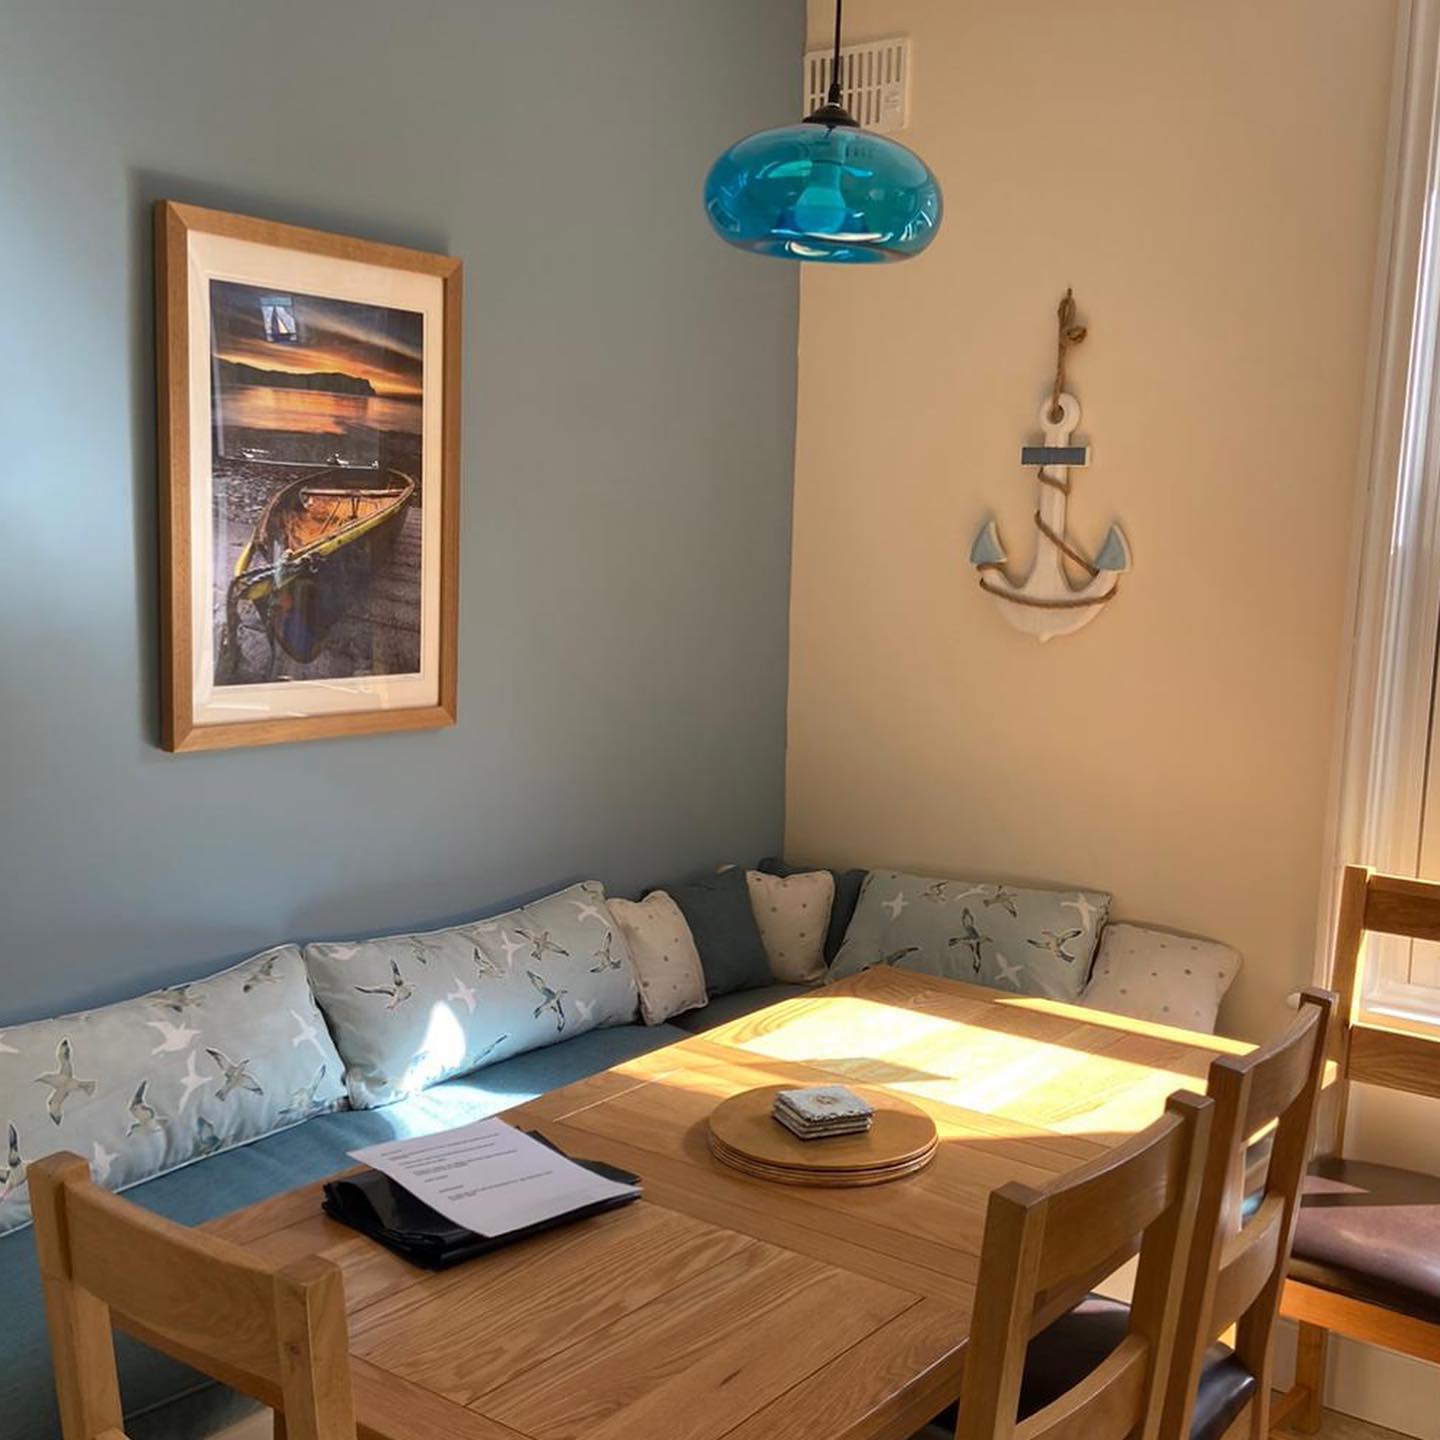 Our seaside themed dining area